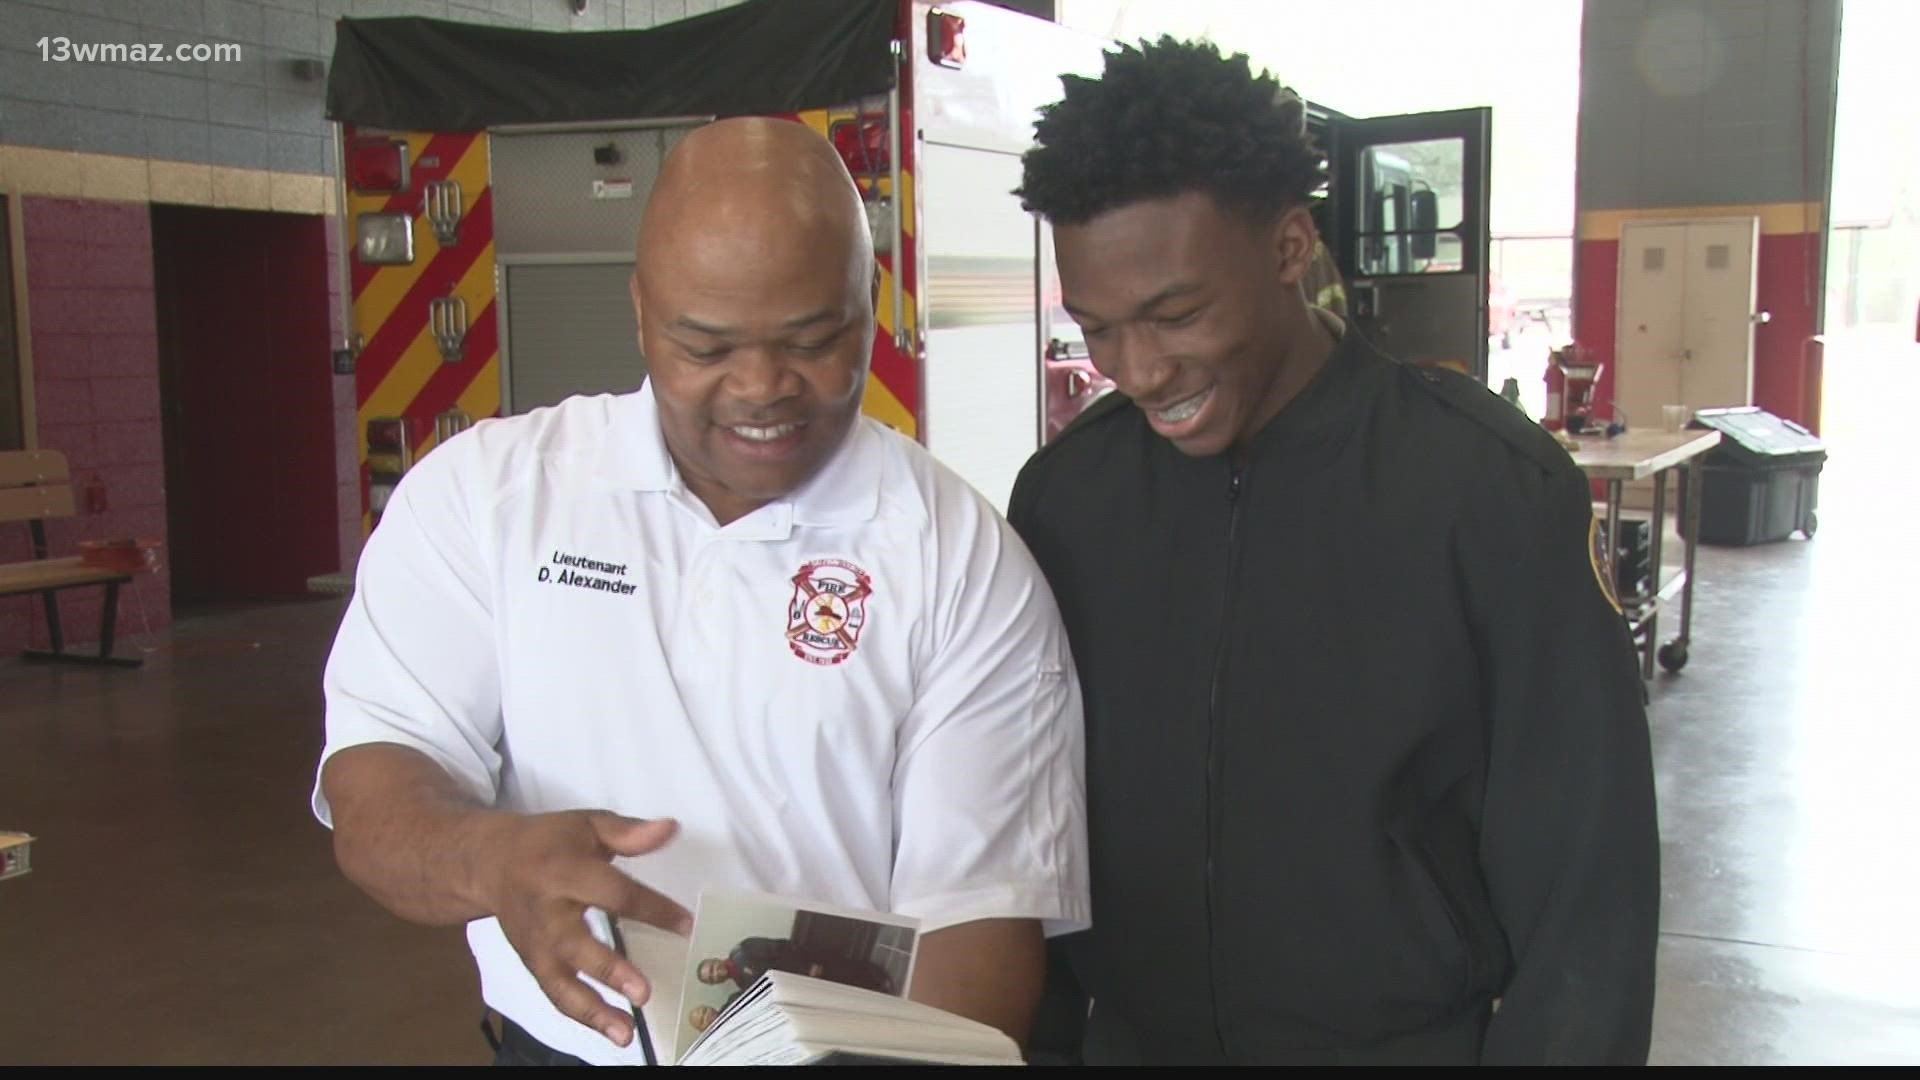 The scholarship covers the cost of tuition, fees, and books. The winner must serve two years with Baldwin County Fire Rescue after graduation